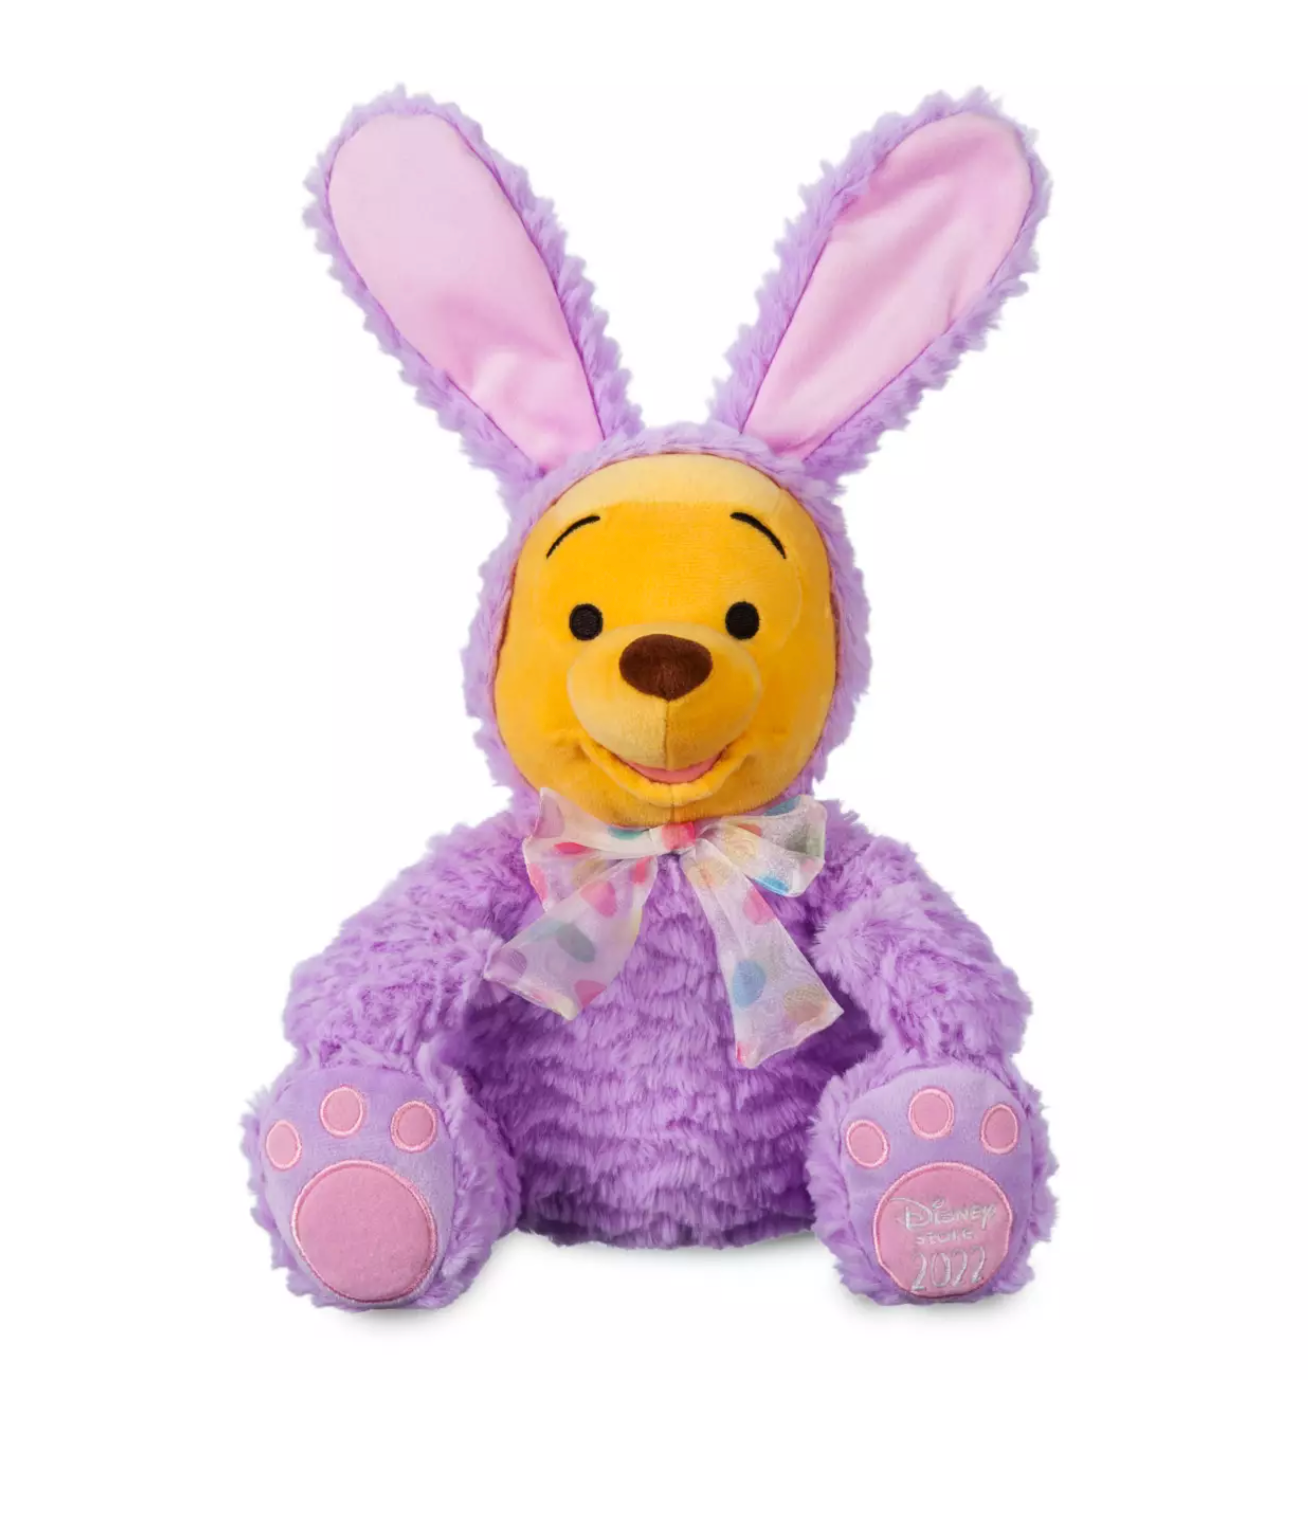 Disney Easter 2022 Bunny Winnie the Pooh Plush New with Tag